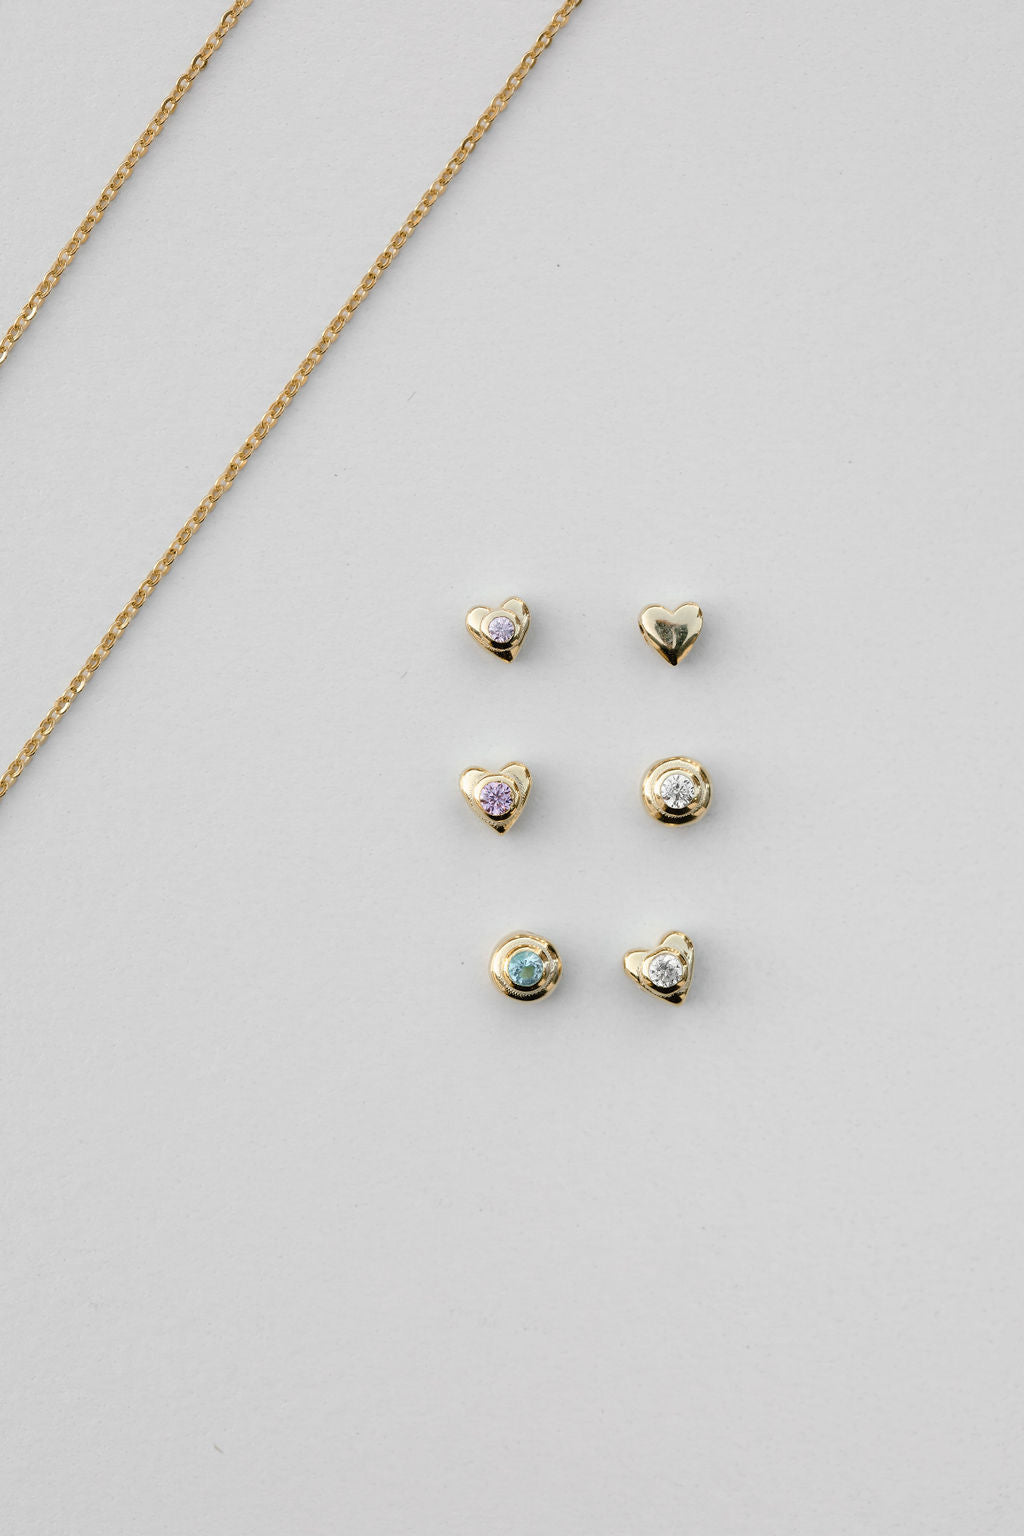 birthstone pendants and necklace